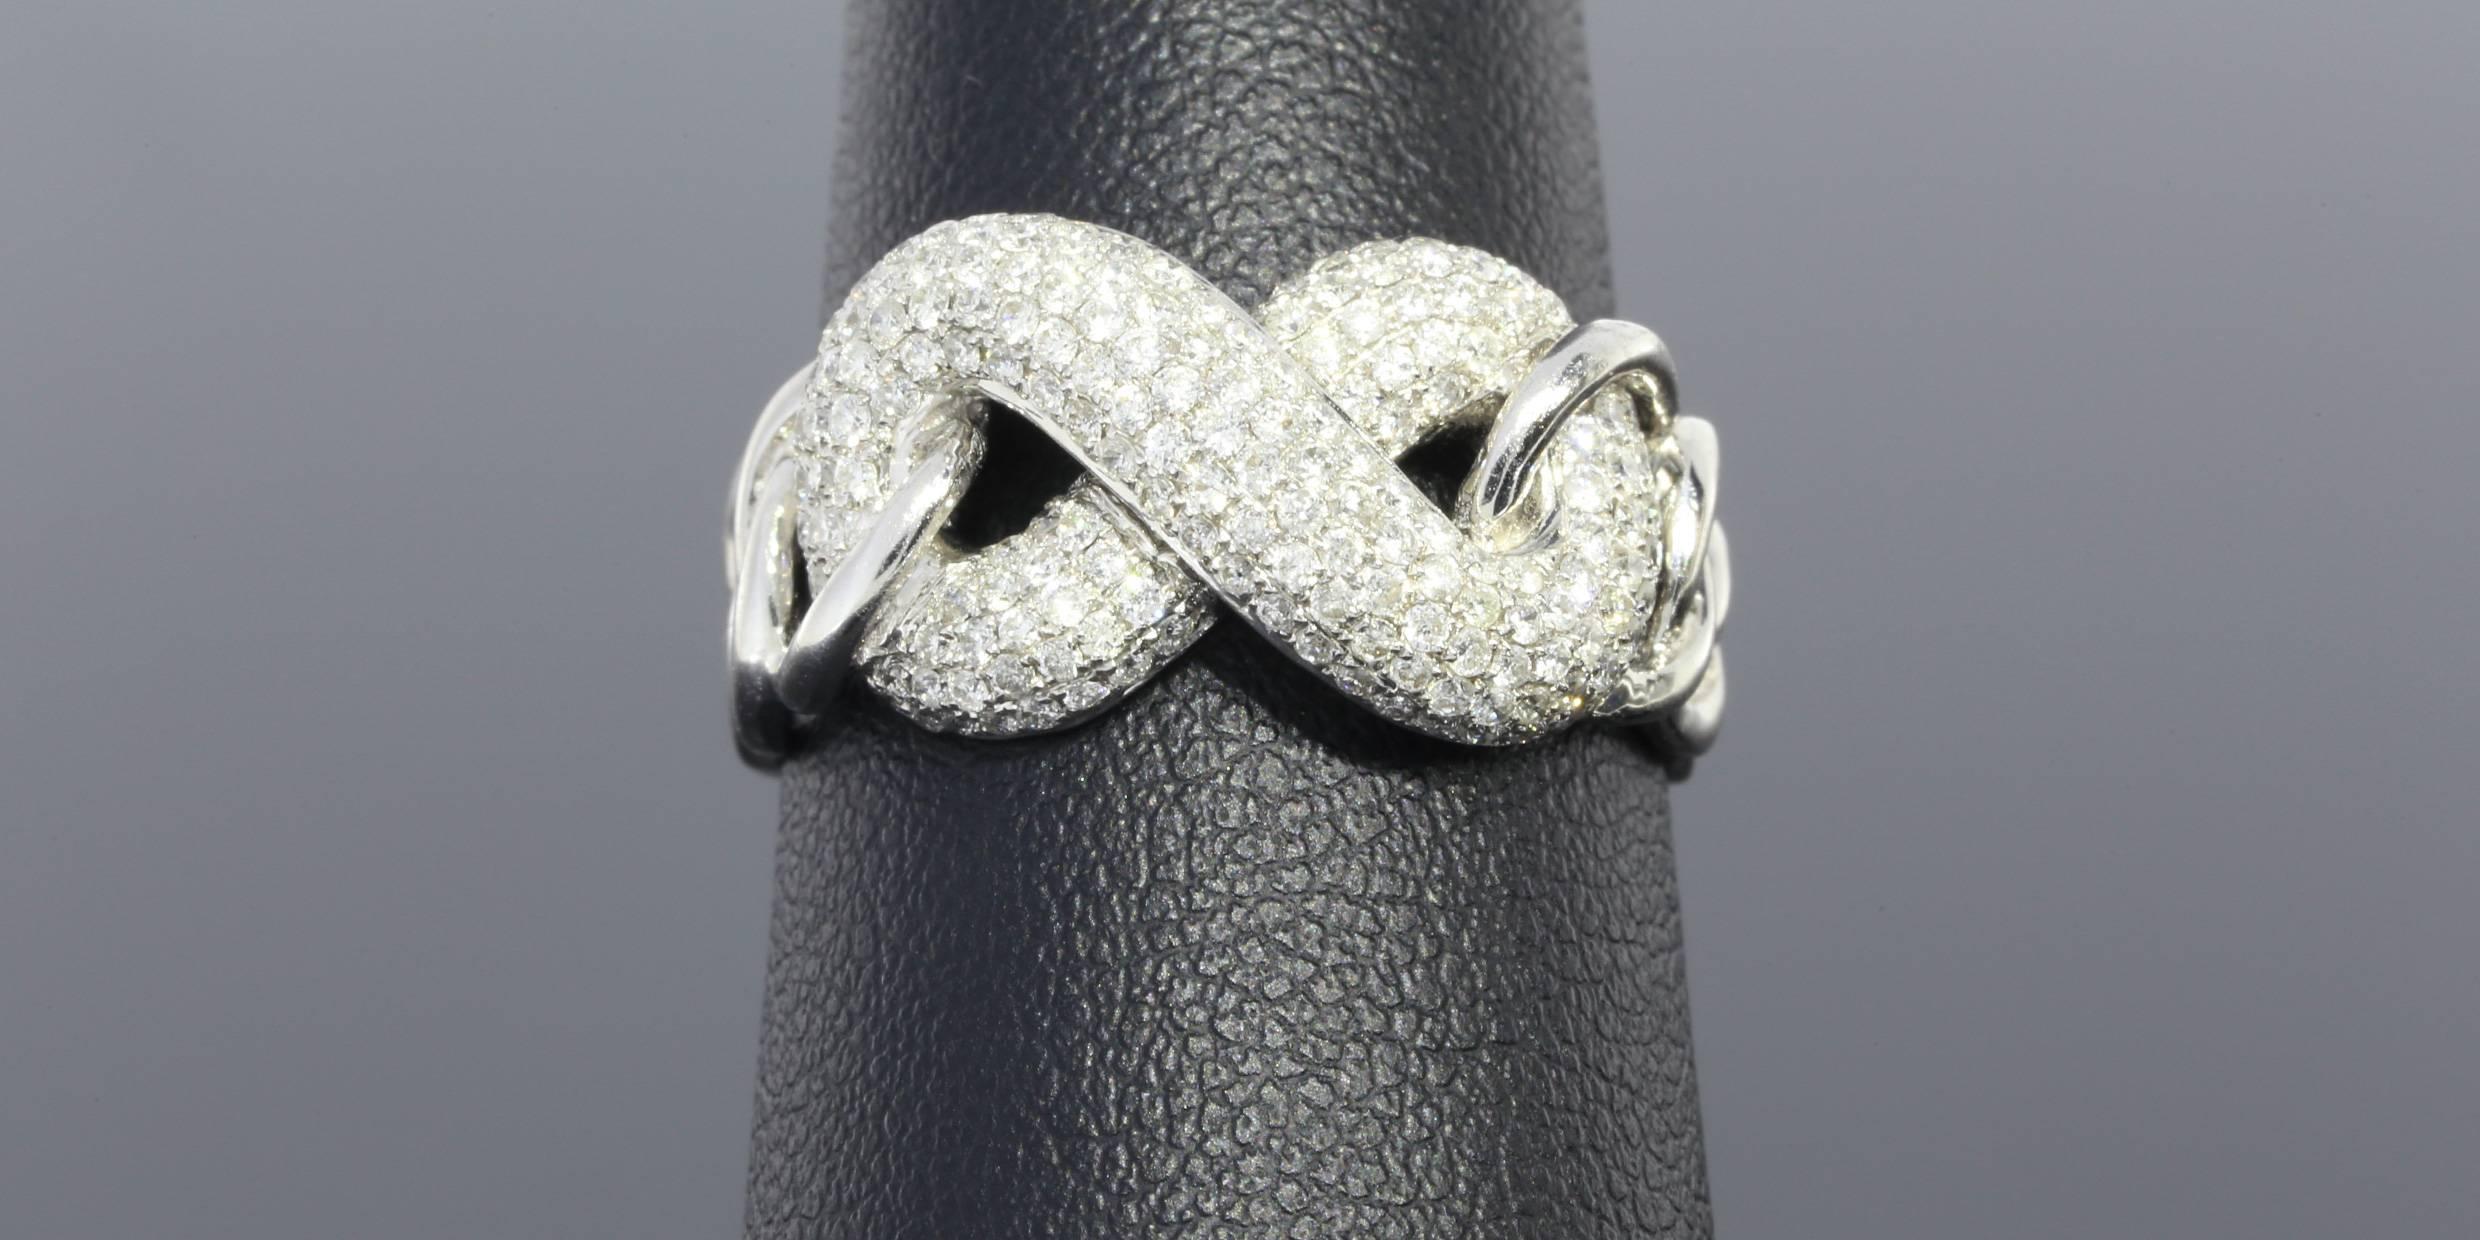 This amazing ring is sparkly, beautiful, & quite unique! The ring features round brilliant cut diamonds that have a combined total weight of 1 carat. These diamonds are pave set in an infinity love knot in the center of an 18 karat white gold ring.